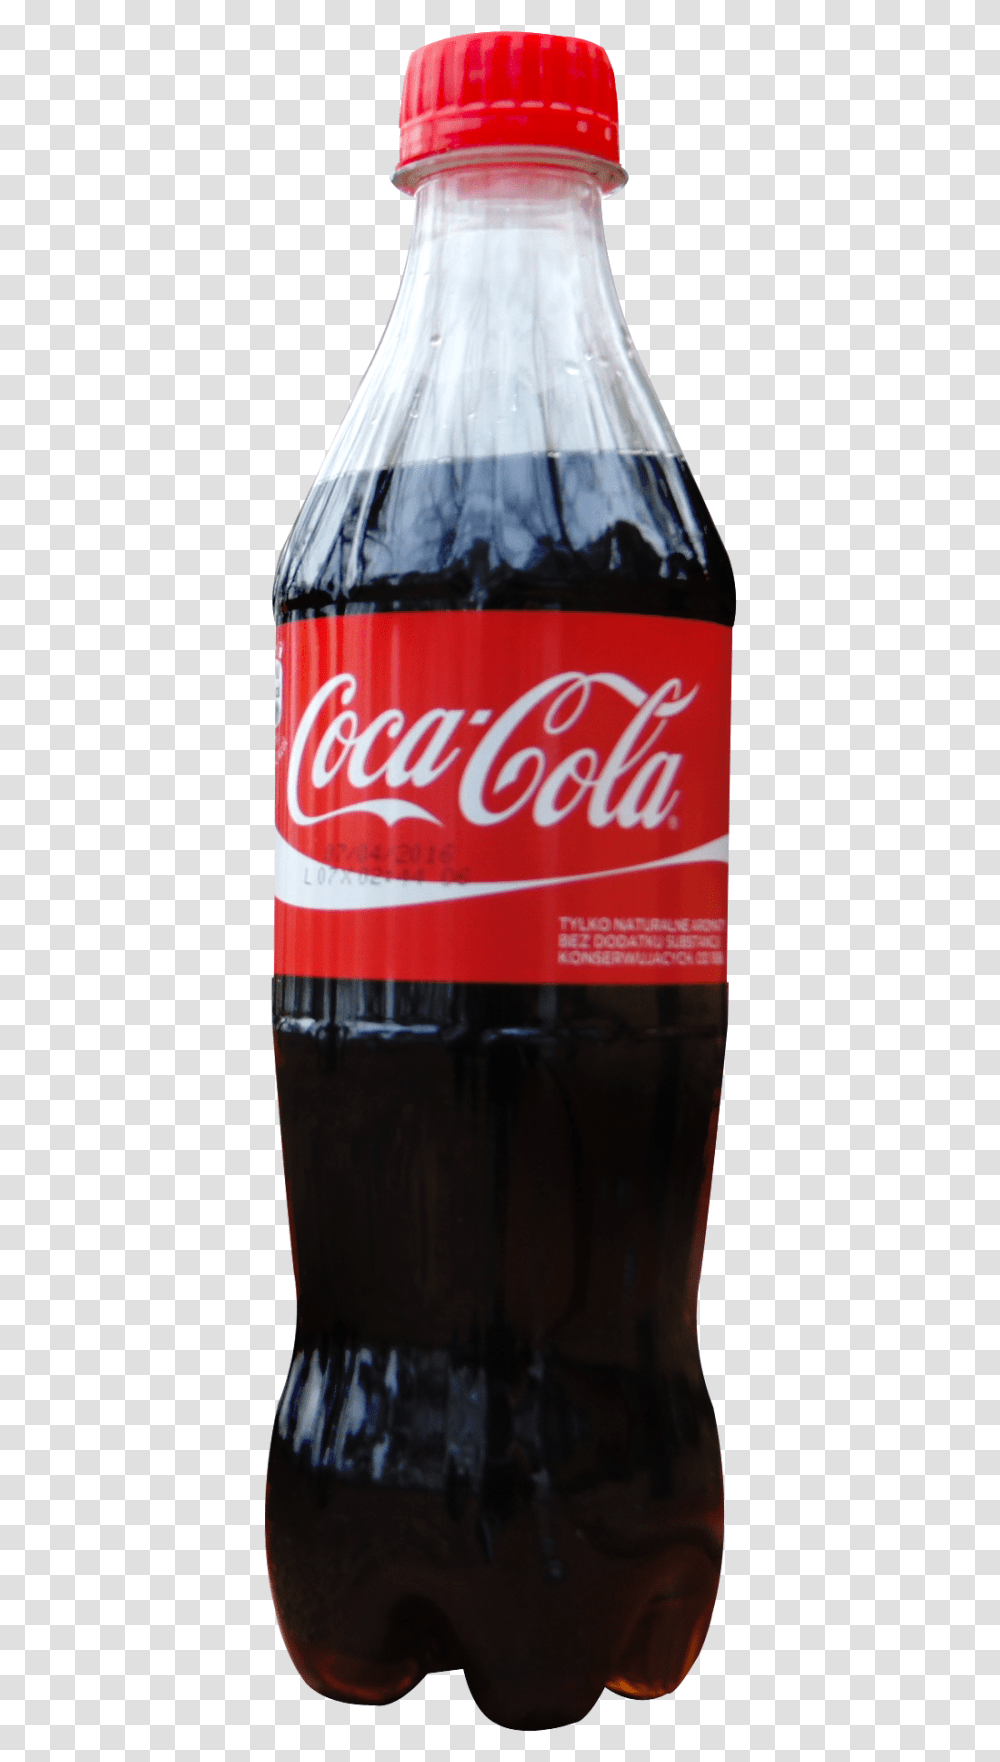 Coca Cola Pictures Icons And Coca Cola Bottle, Coke, Beverage, Drink, Soda Transparent Png